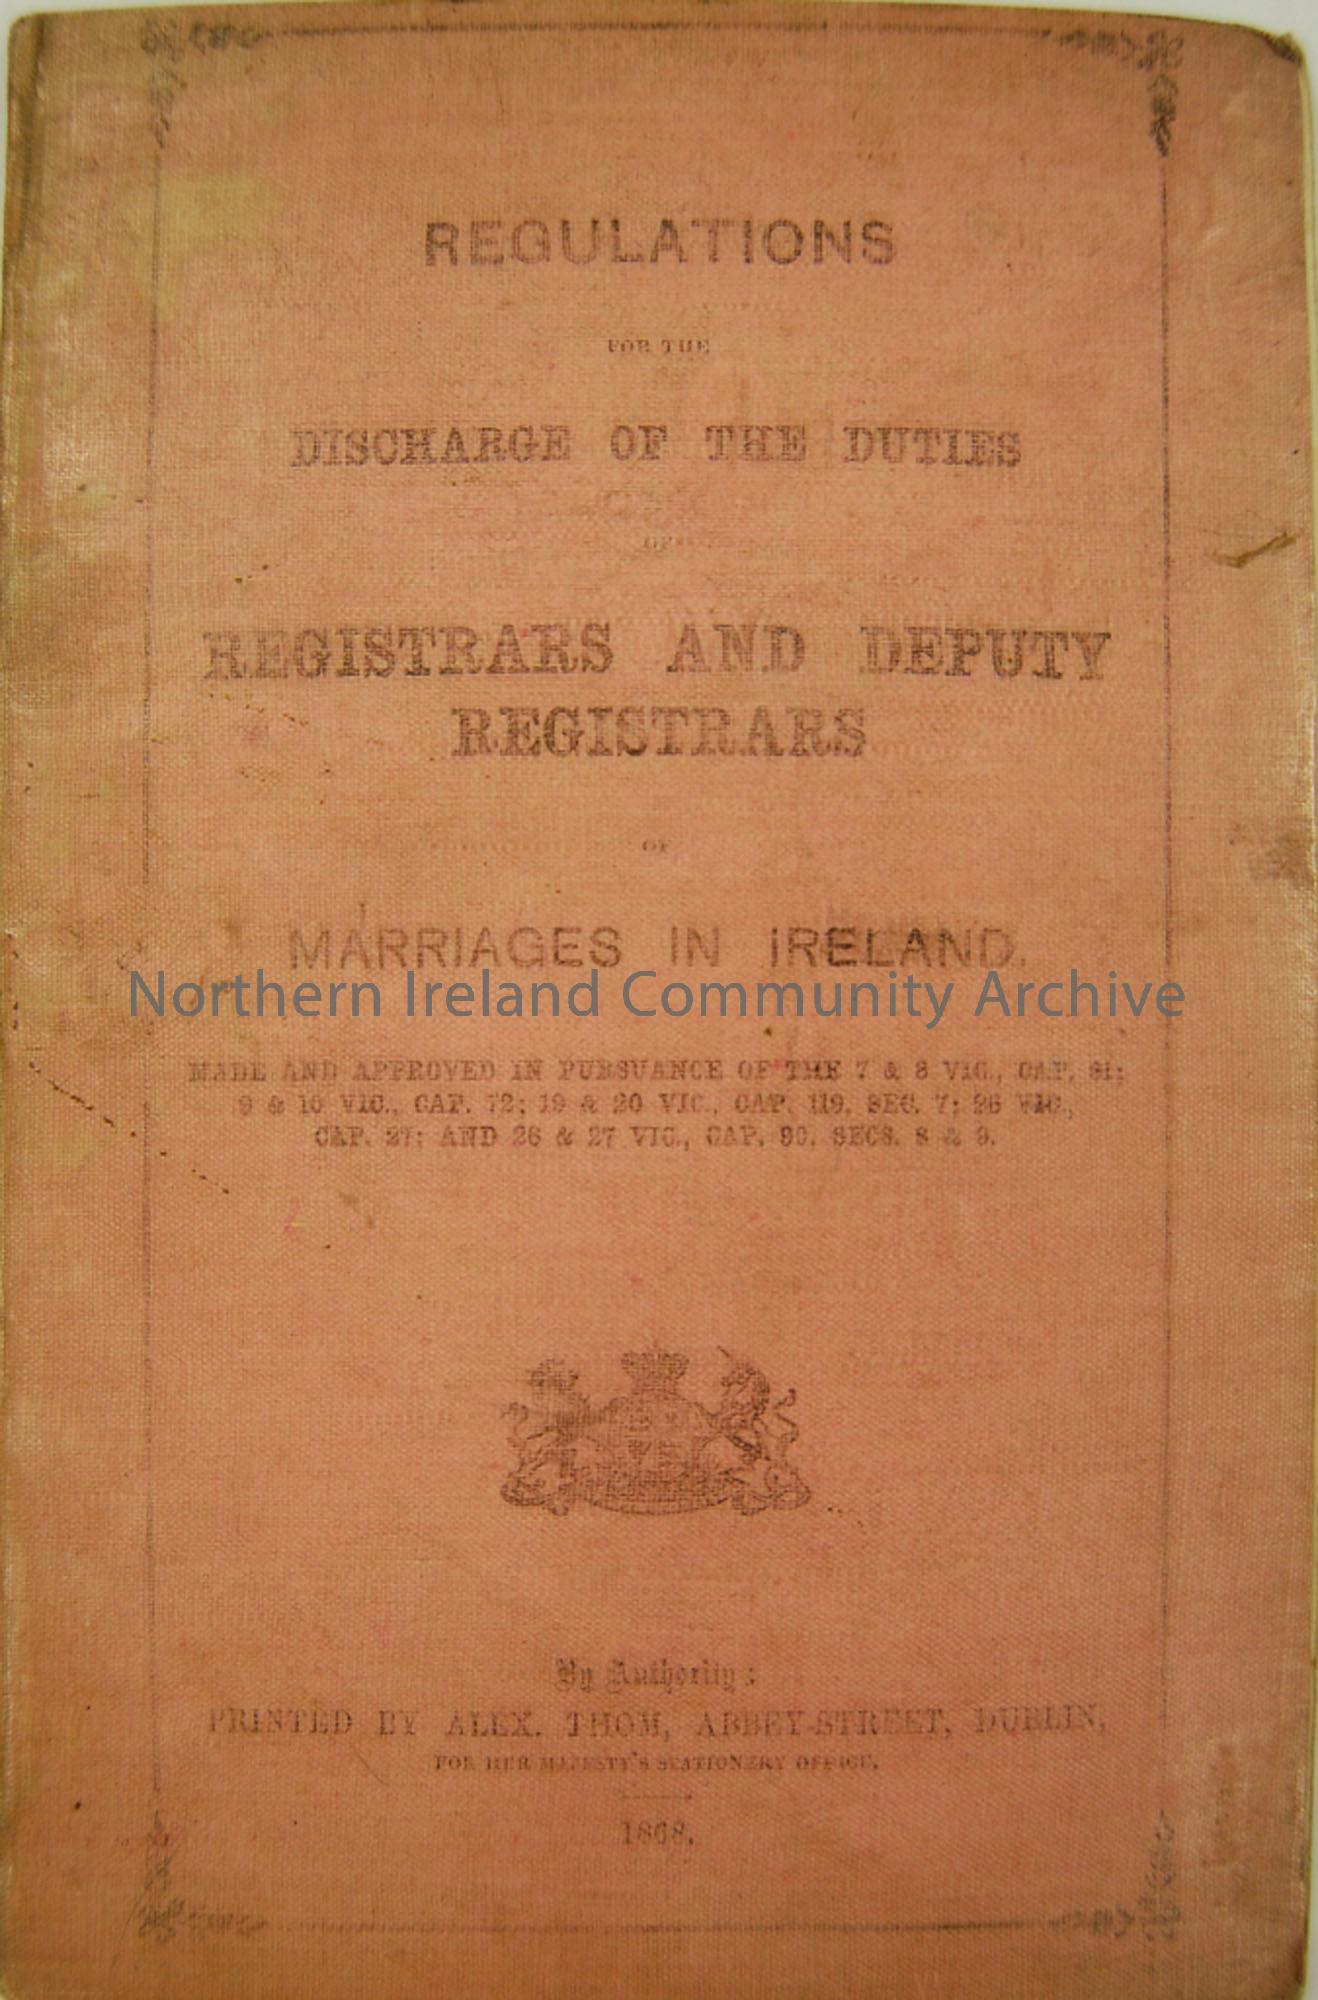 Regulations for the discharge of the duties of Registrars and Deputy Registrars of marriages in Ireland. 1868.